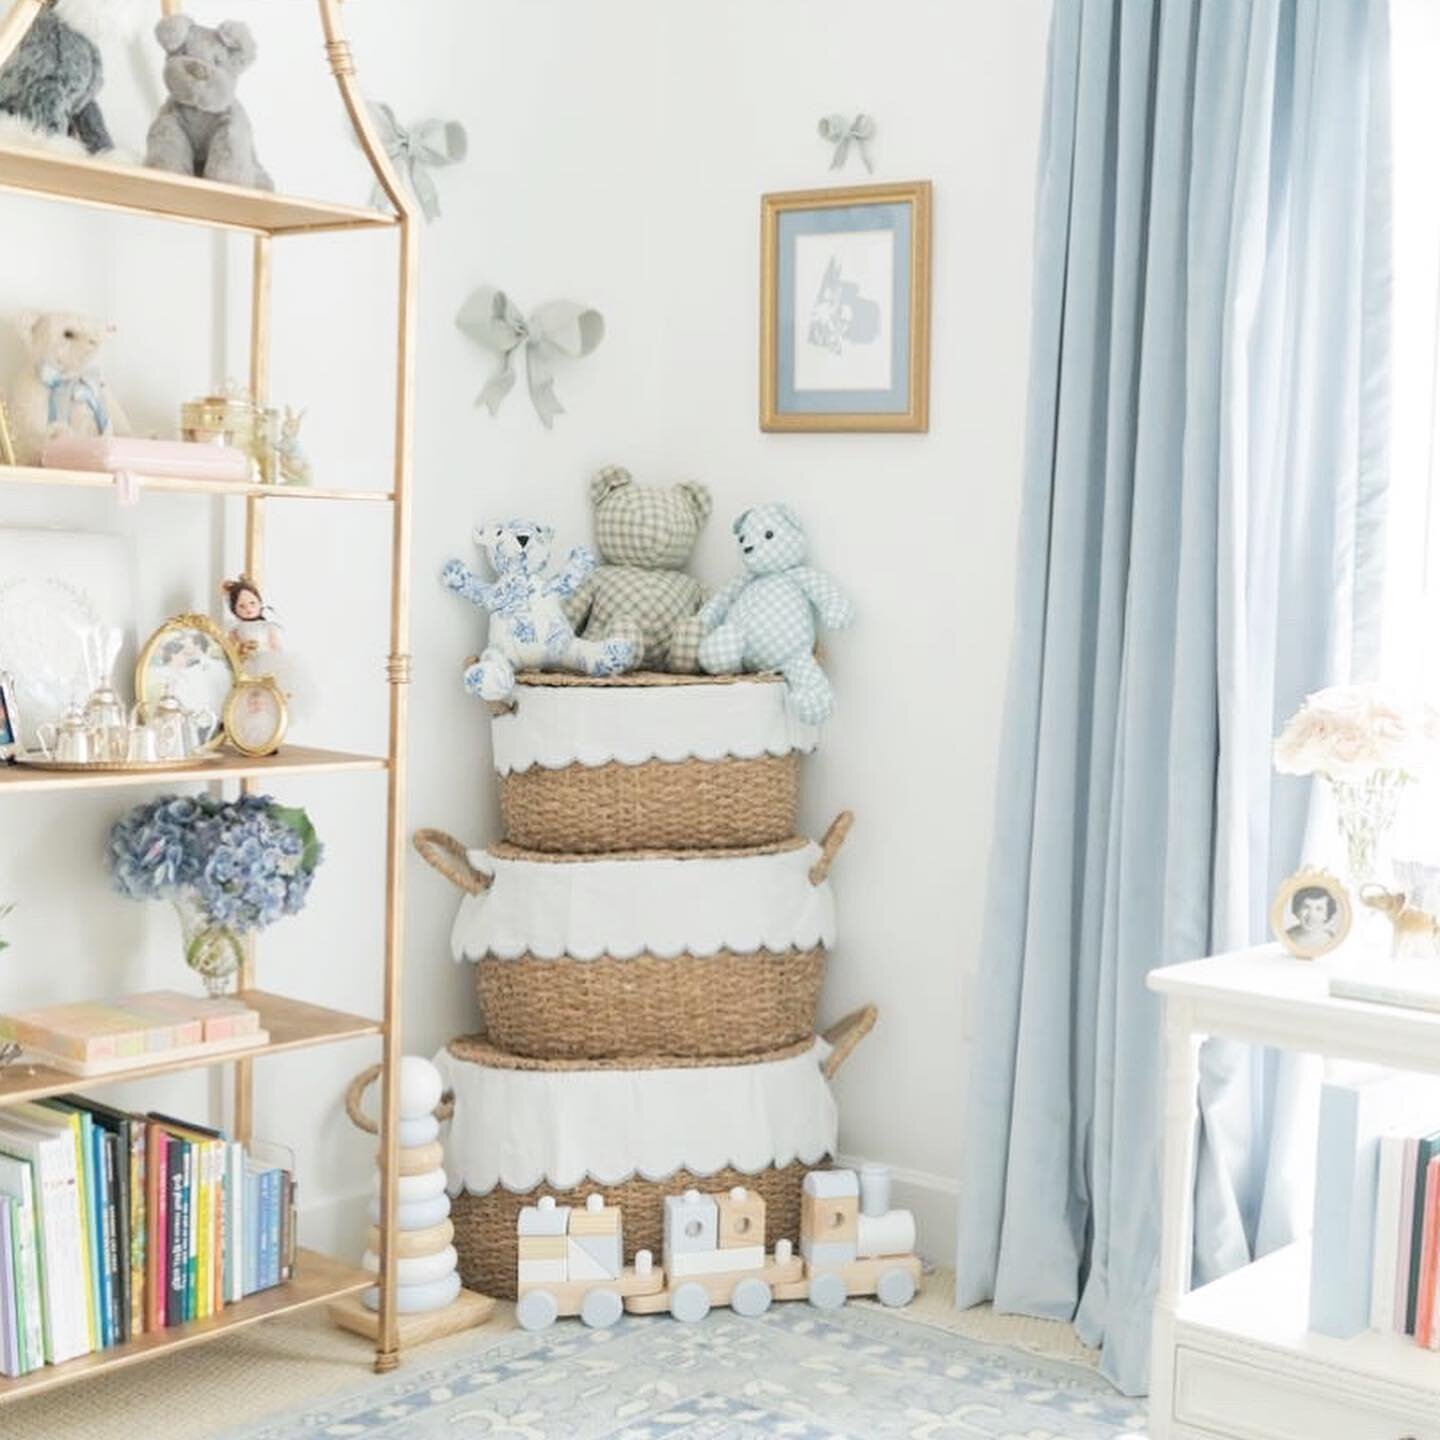 This little nursery corner by @shopfifinella is too precious not to share! I love how she incorporated our blue bows next to a @maebickleindesigns silhouette 🎀💙
📸 by @domusaureaportraits 
.
#nurserydecor #ribbons #bows #pottery #handmade #nurseryi